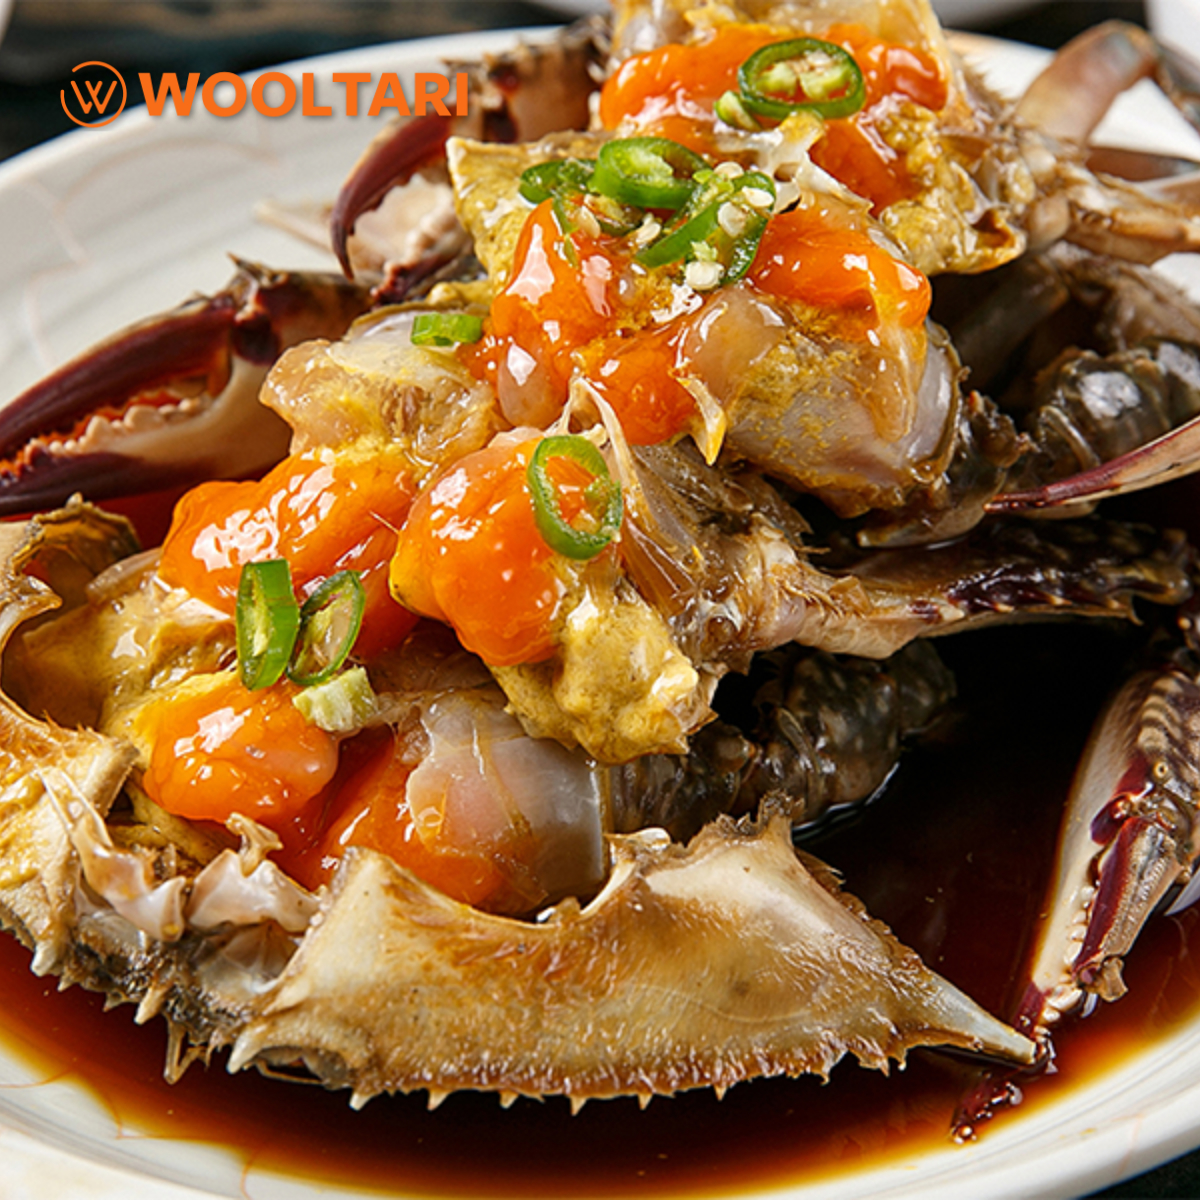 Soysauce marinated crabs 1.5kg  x2 bottles product image